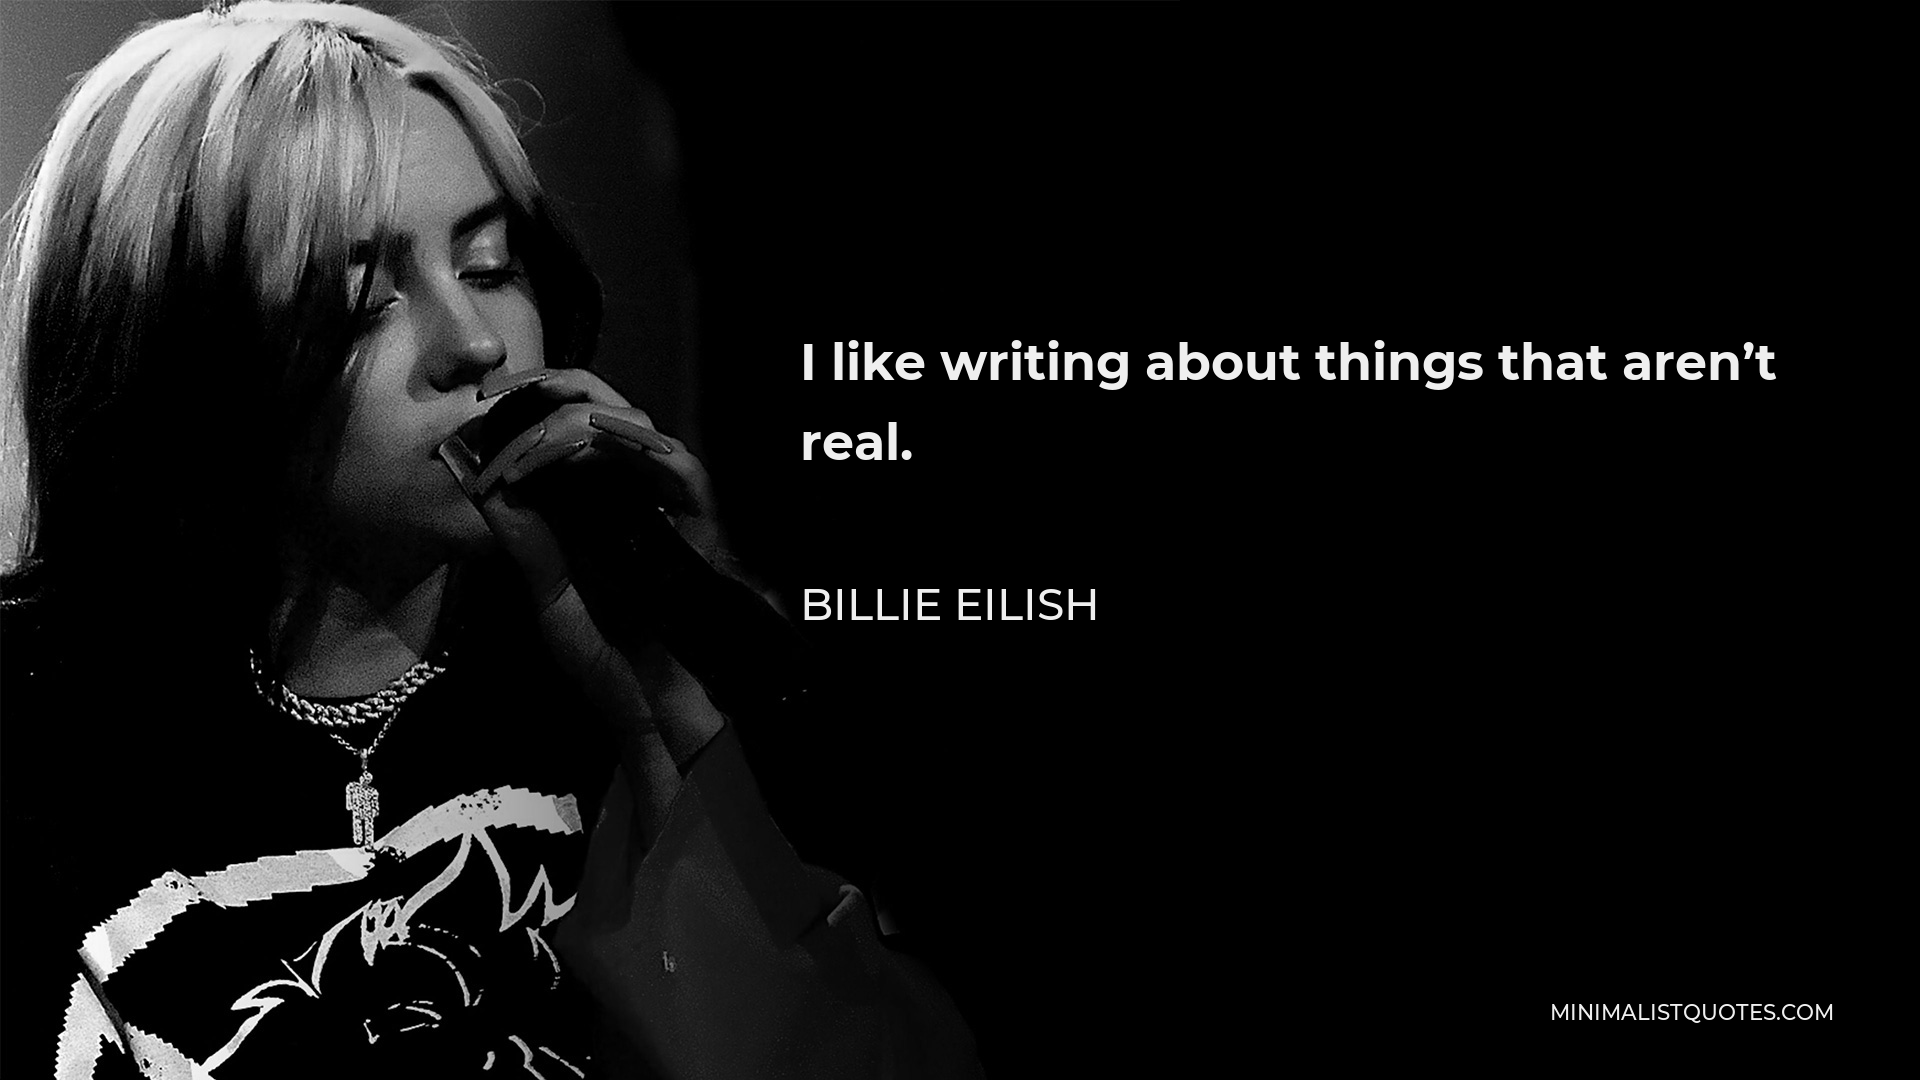 Billie Eilish Quote - I like writing about things that aren’t real.